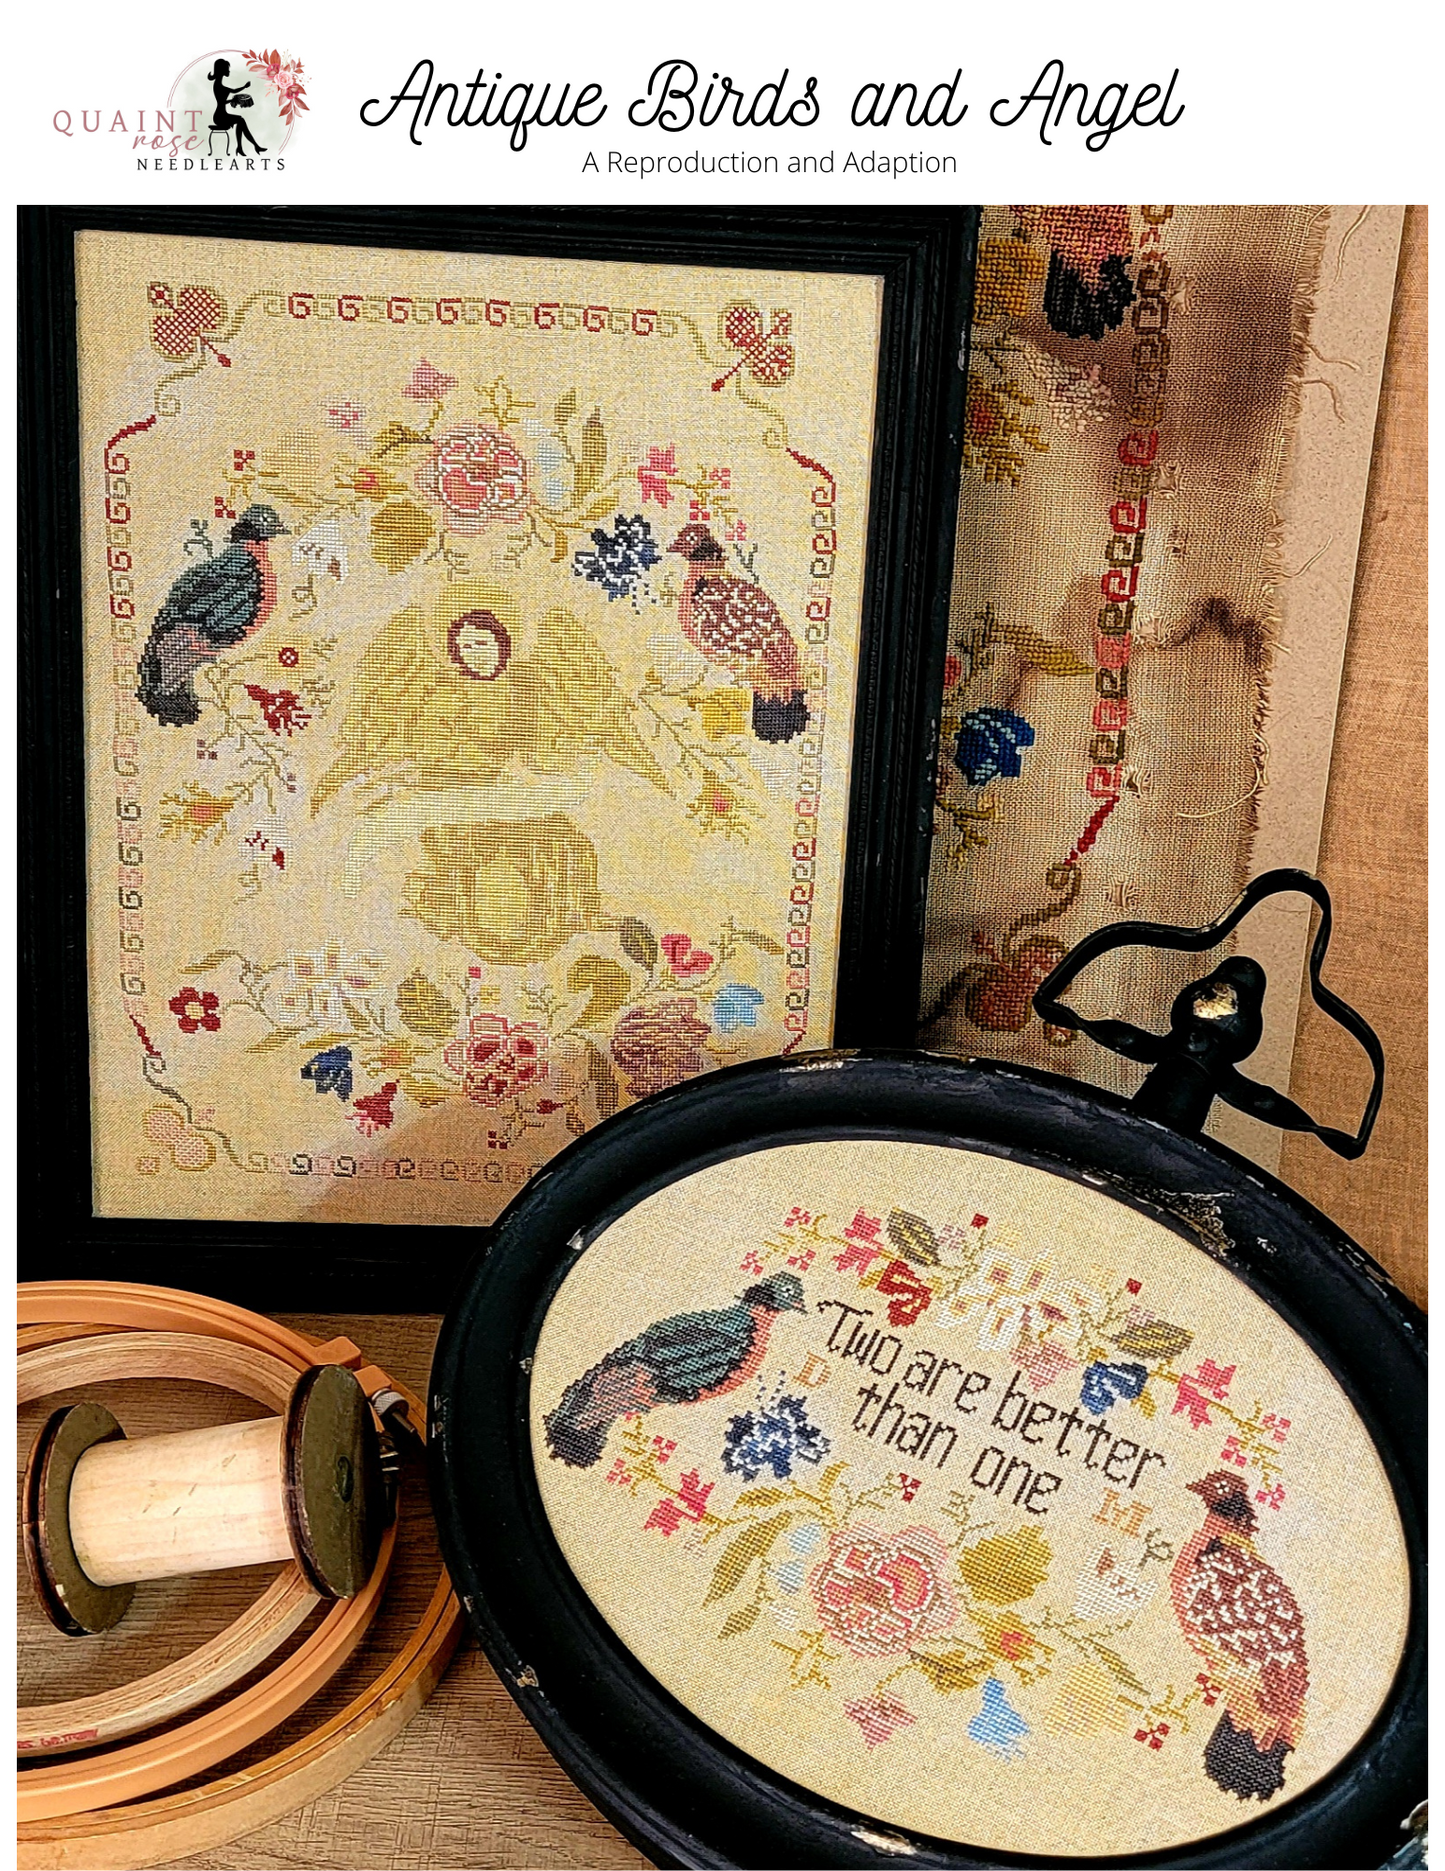 Antique Birds and Angel - Quaint Rose NeedleArts - Cross Stitch Patterns